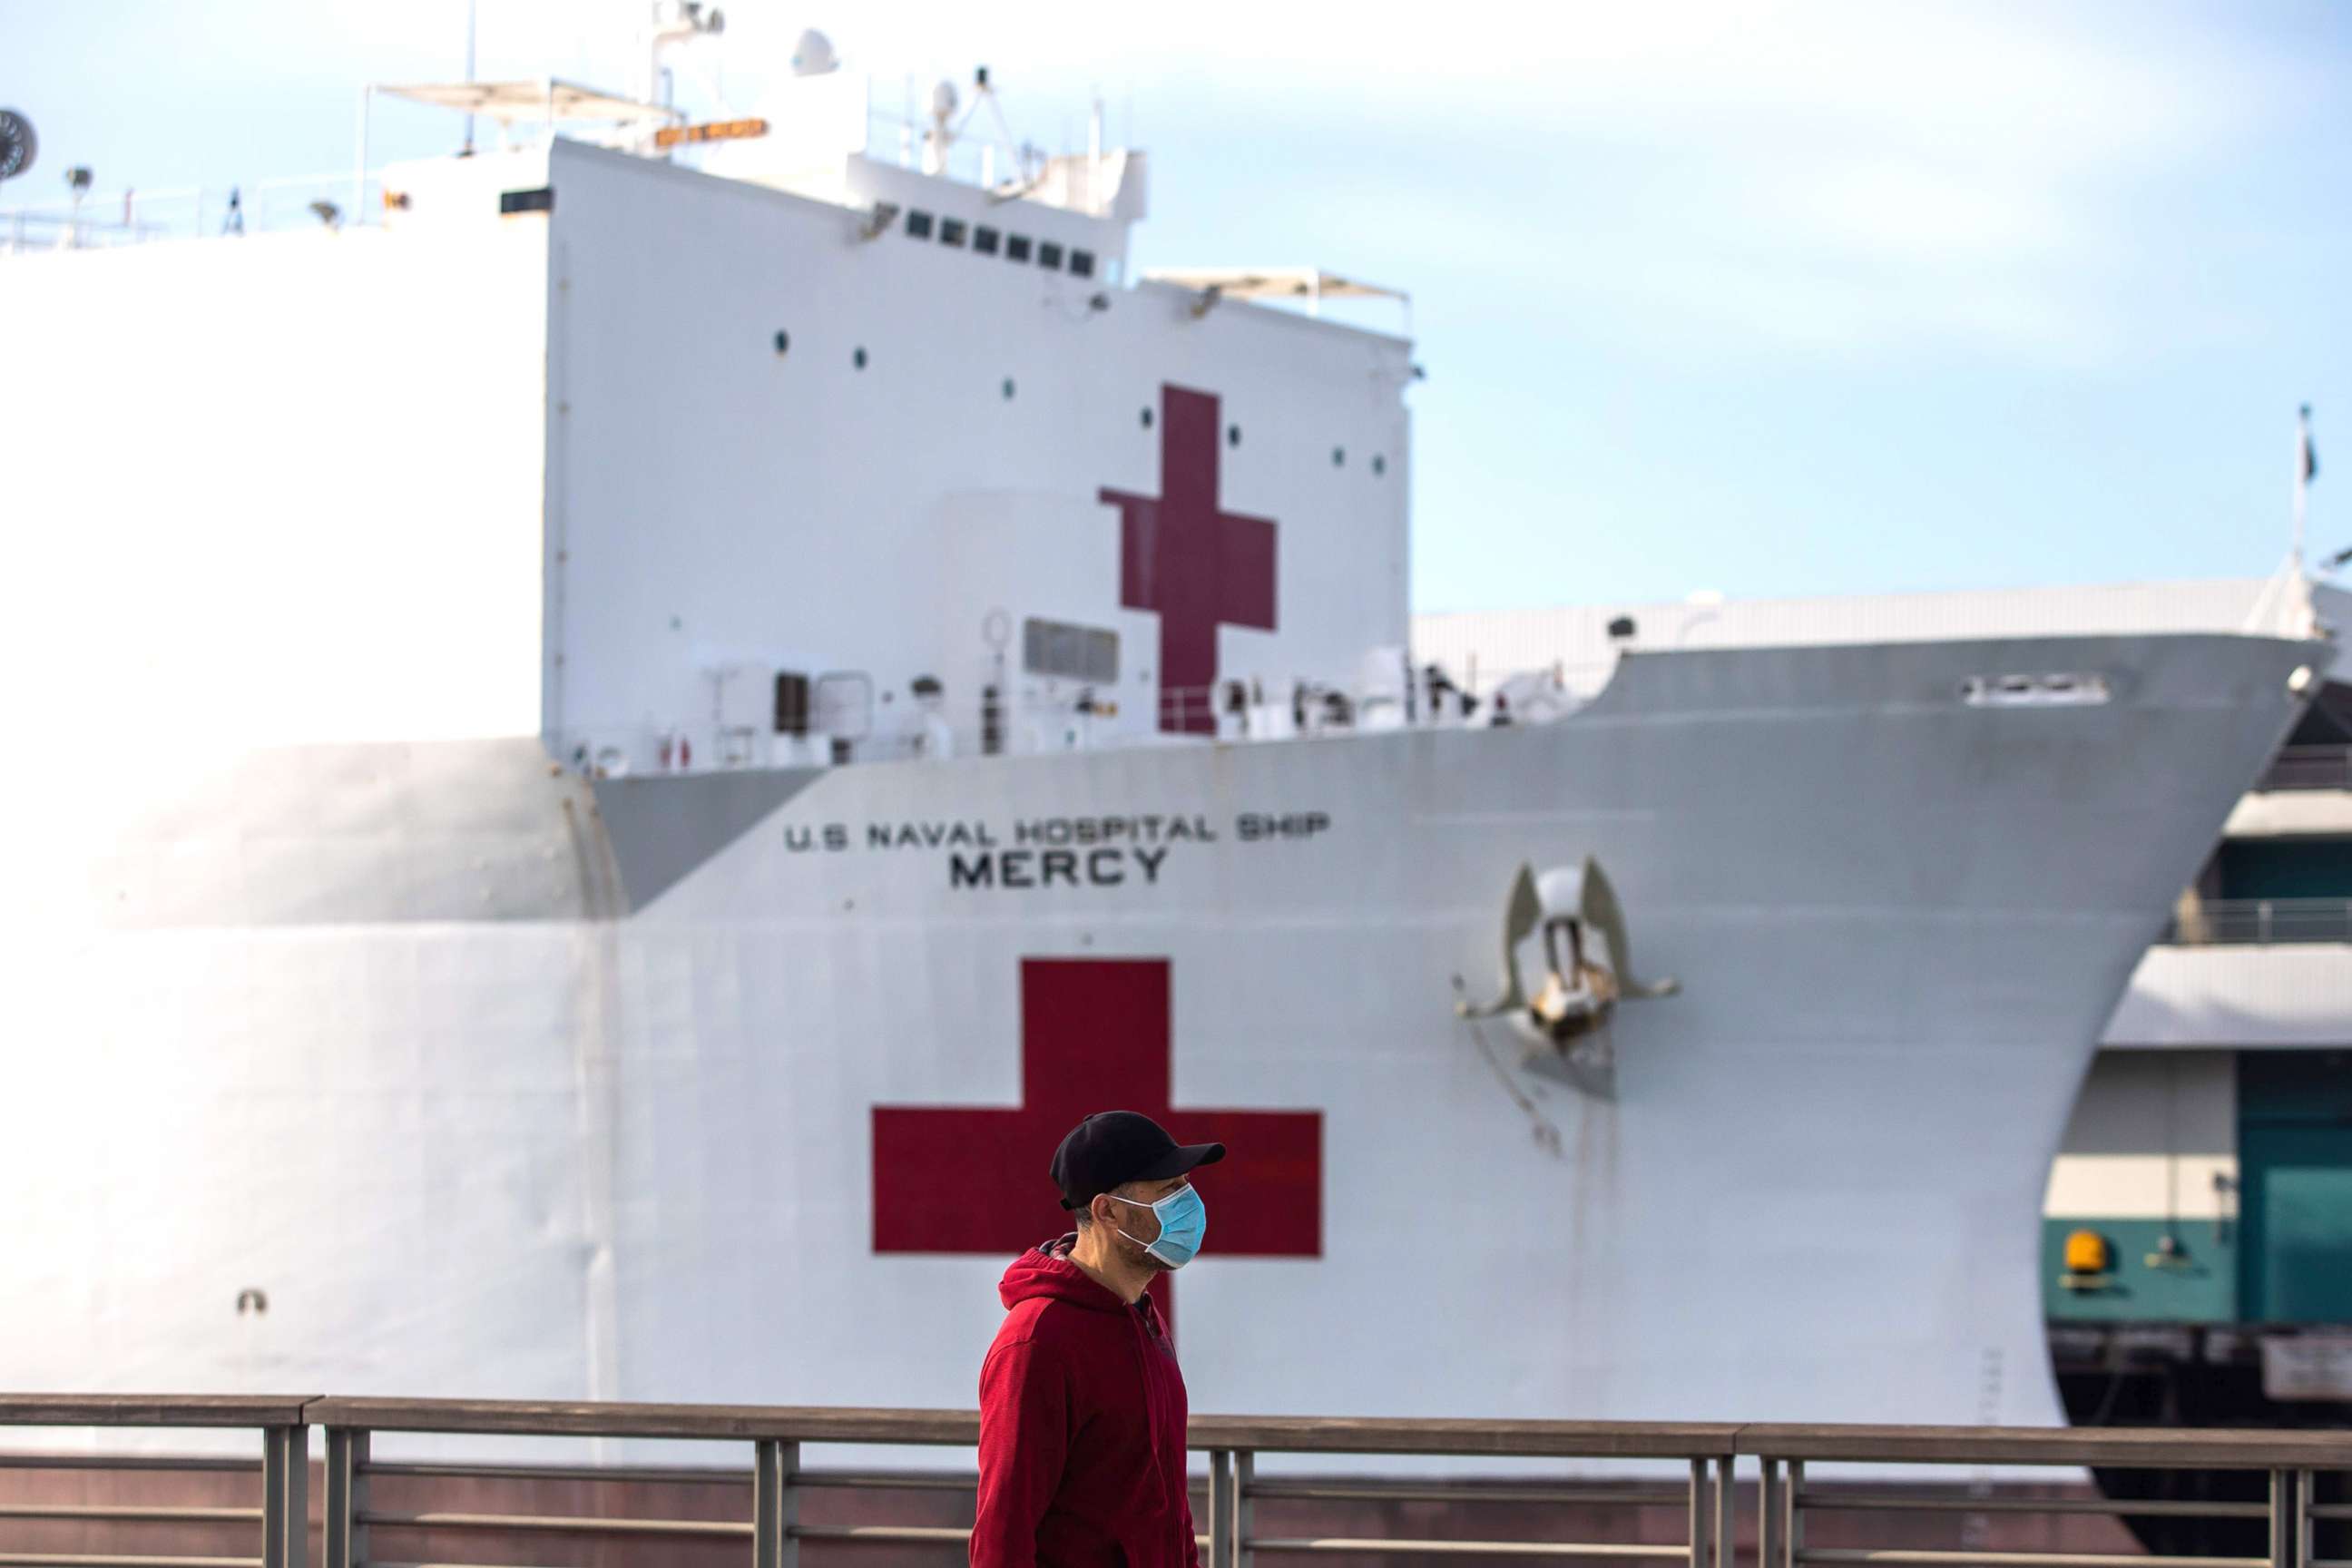 PHOTO: A man walks wearing facemak as a preventive measure against the spread of the coronavirus in front of the US Navy Hospital ship Mercy, March 28, 2020, at the Port of Los Angeles in the city of San Pedro, Calif.